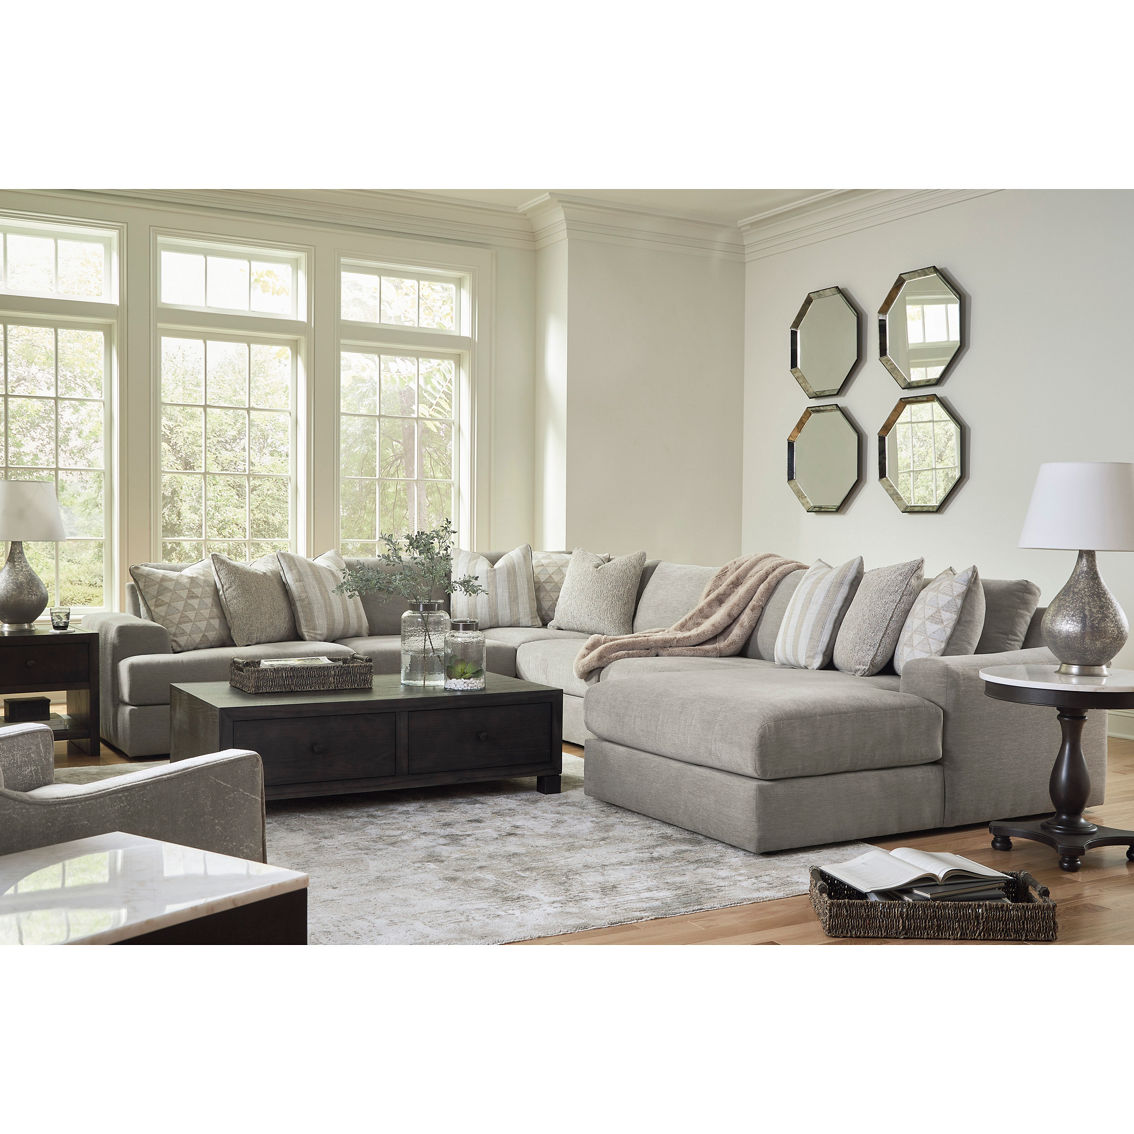 Millennium by Ashley Avaliyah 6 pc. Sectional with Chaise - Image 2 of 2